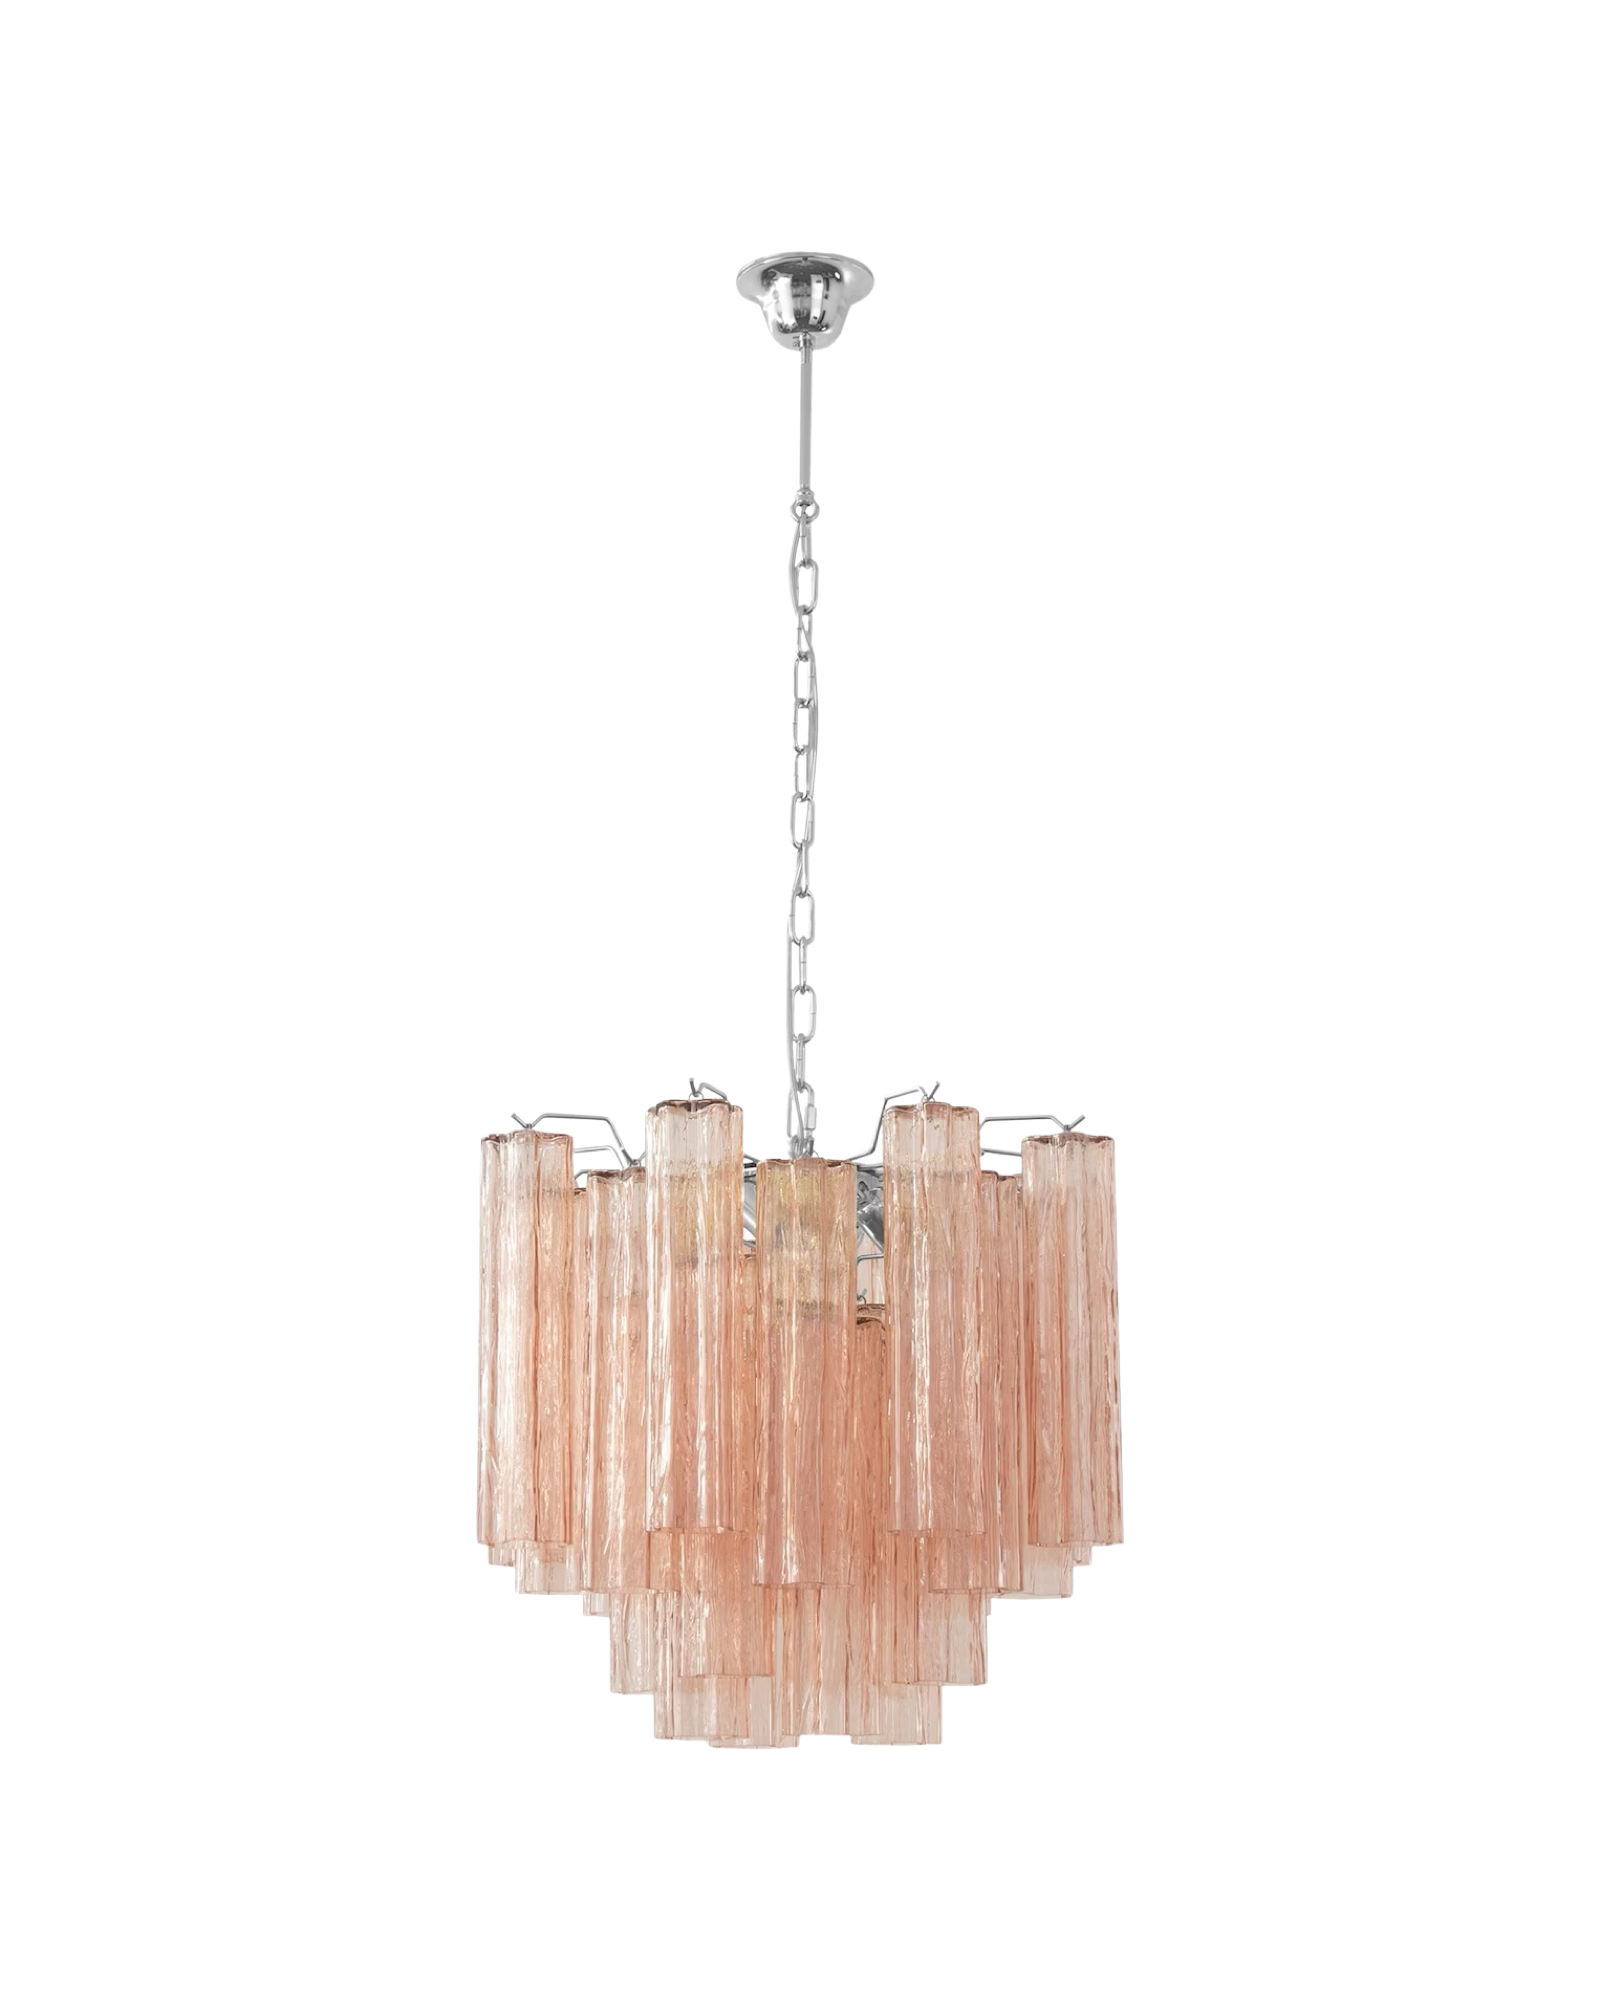 Suspension lamp Made in Italy